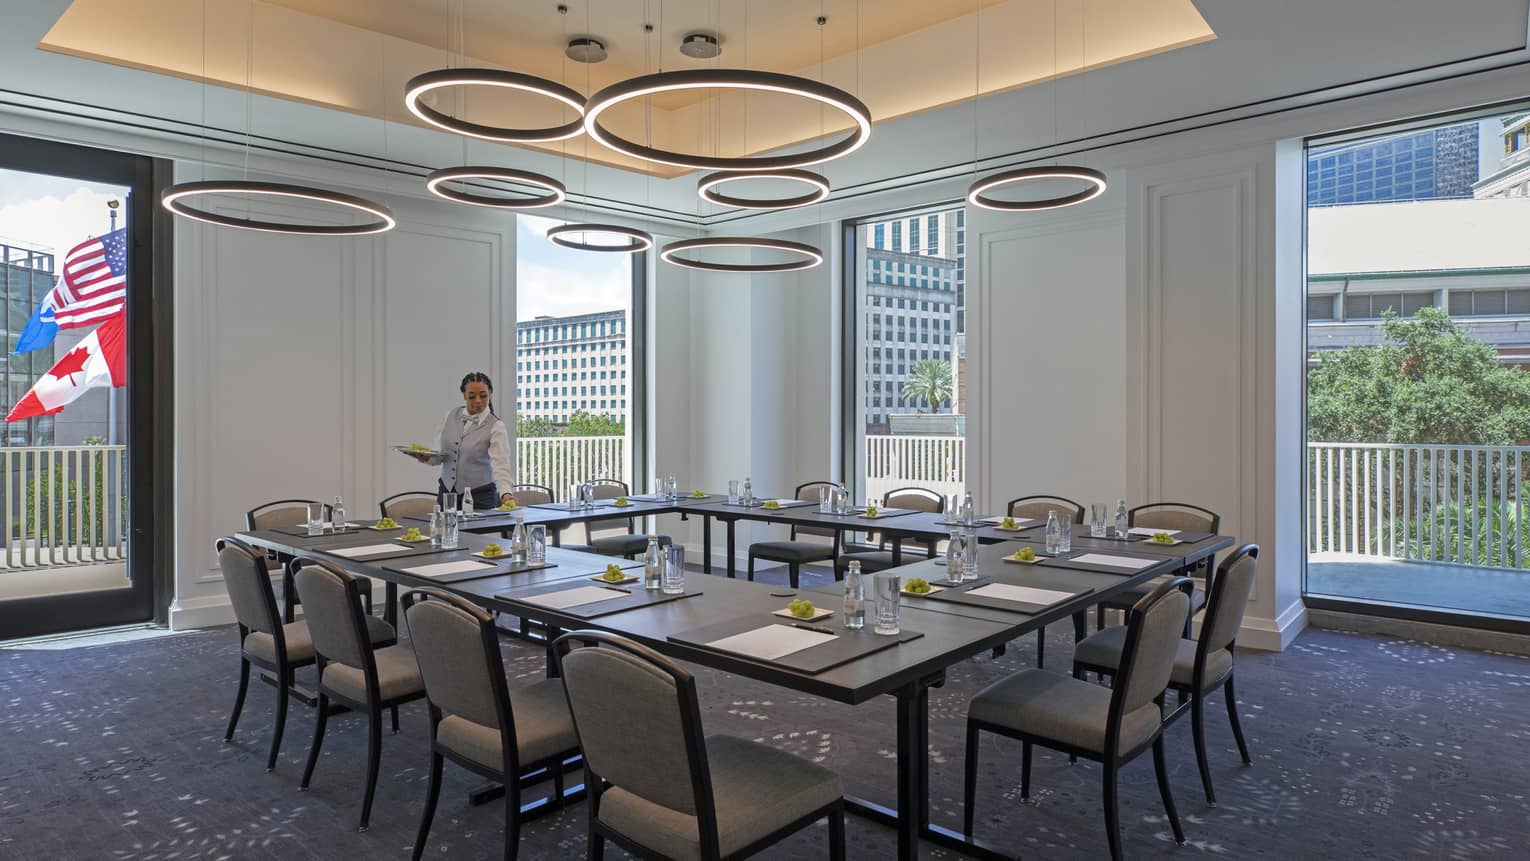 Meeting room with u-shaped table set for twelve, floor-to-ceiling windows, natural light, circular hanging decor